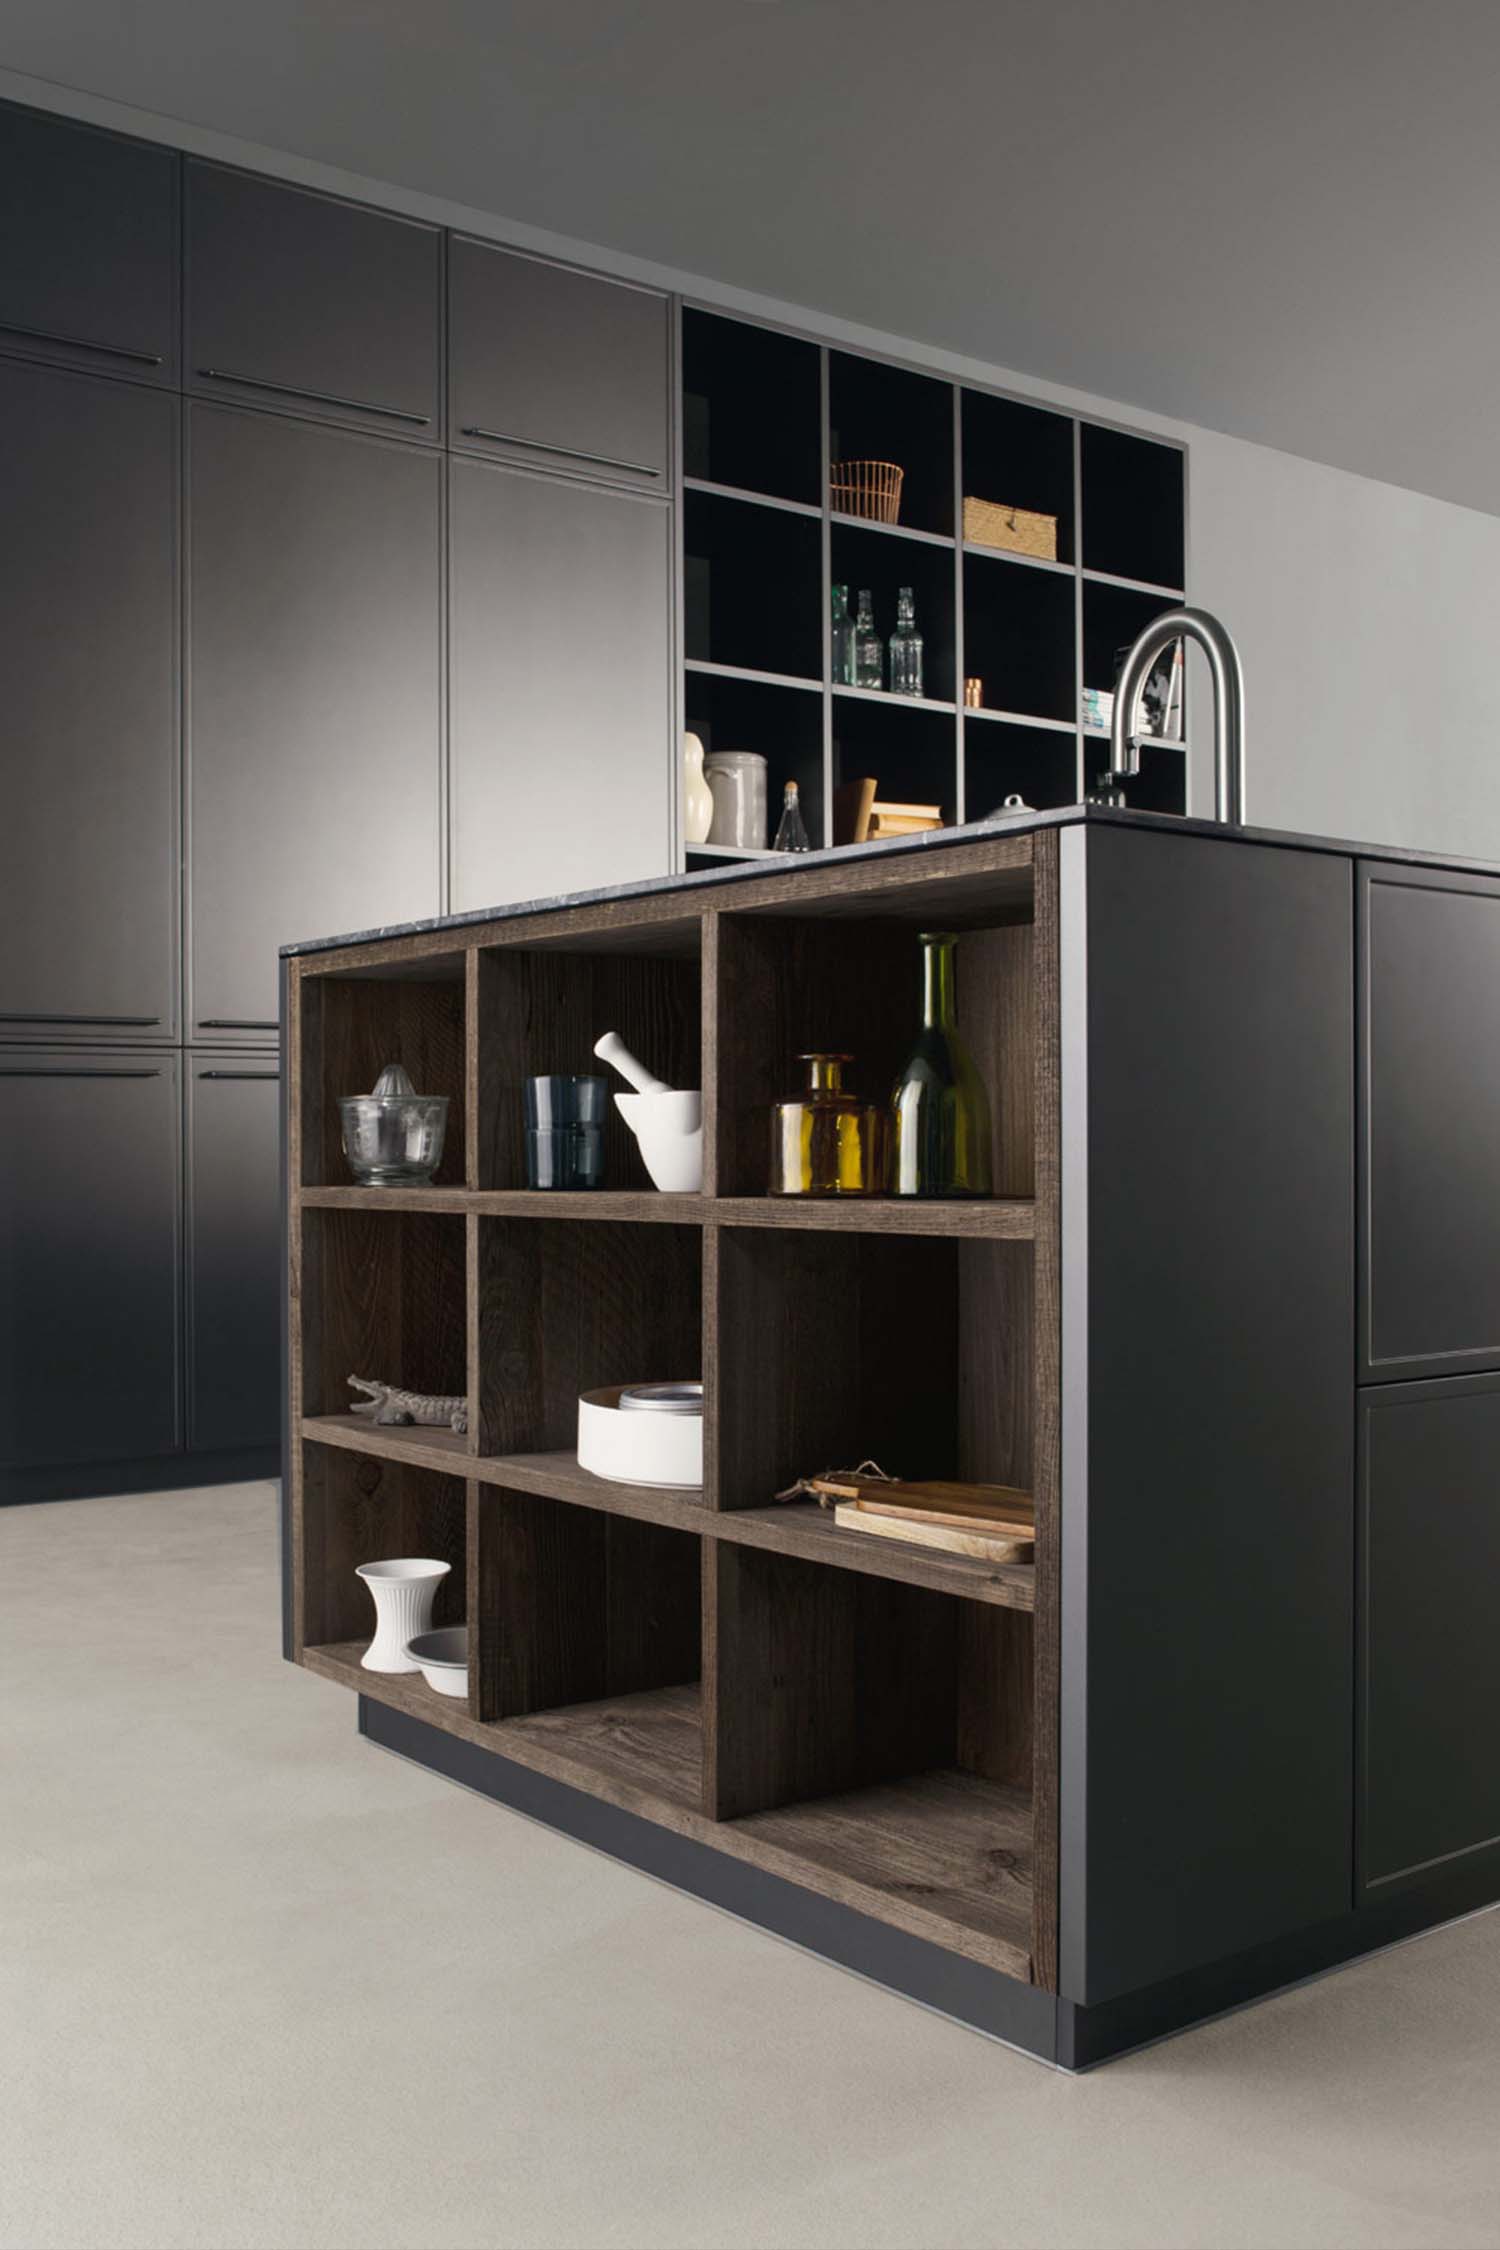 Open storage elements allow for inventory or decoration at the edge of the kitchen island.